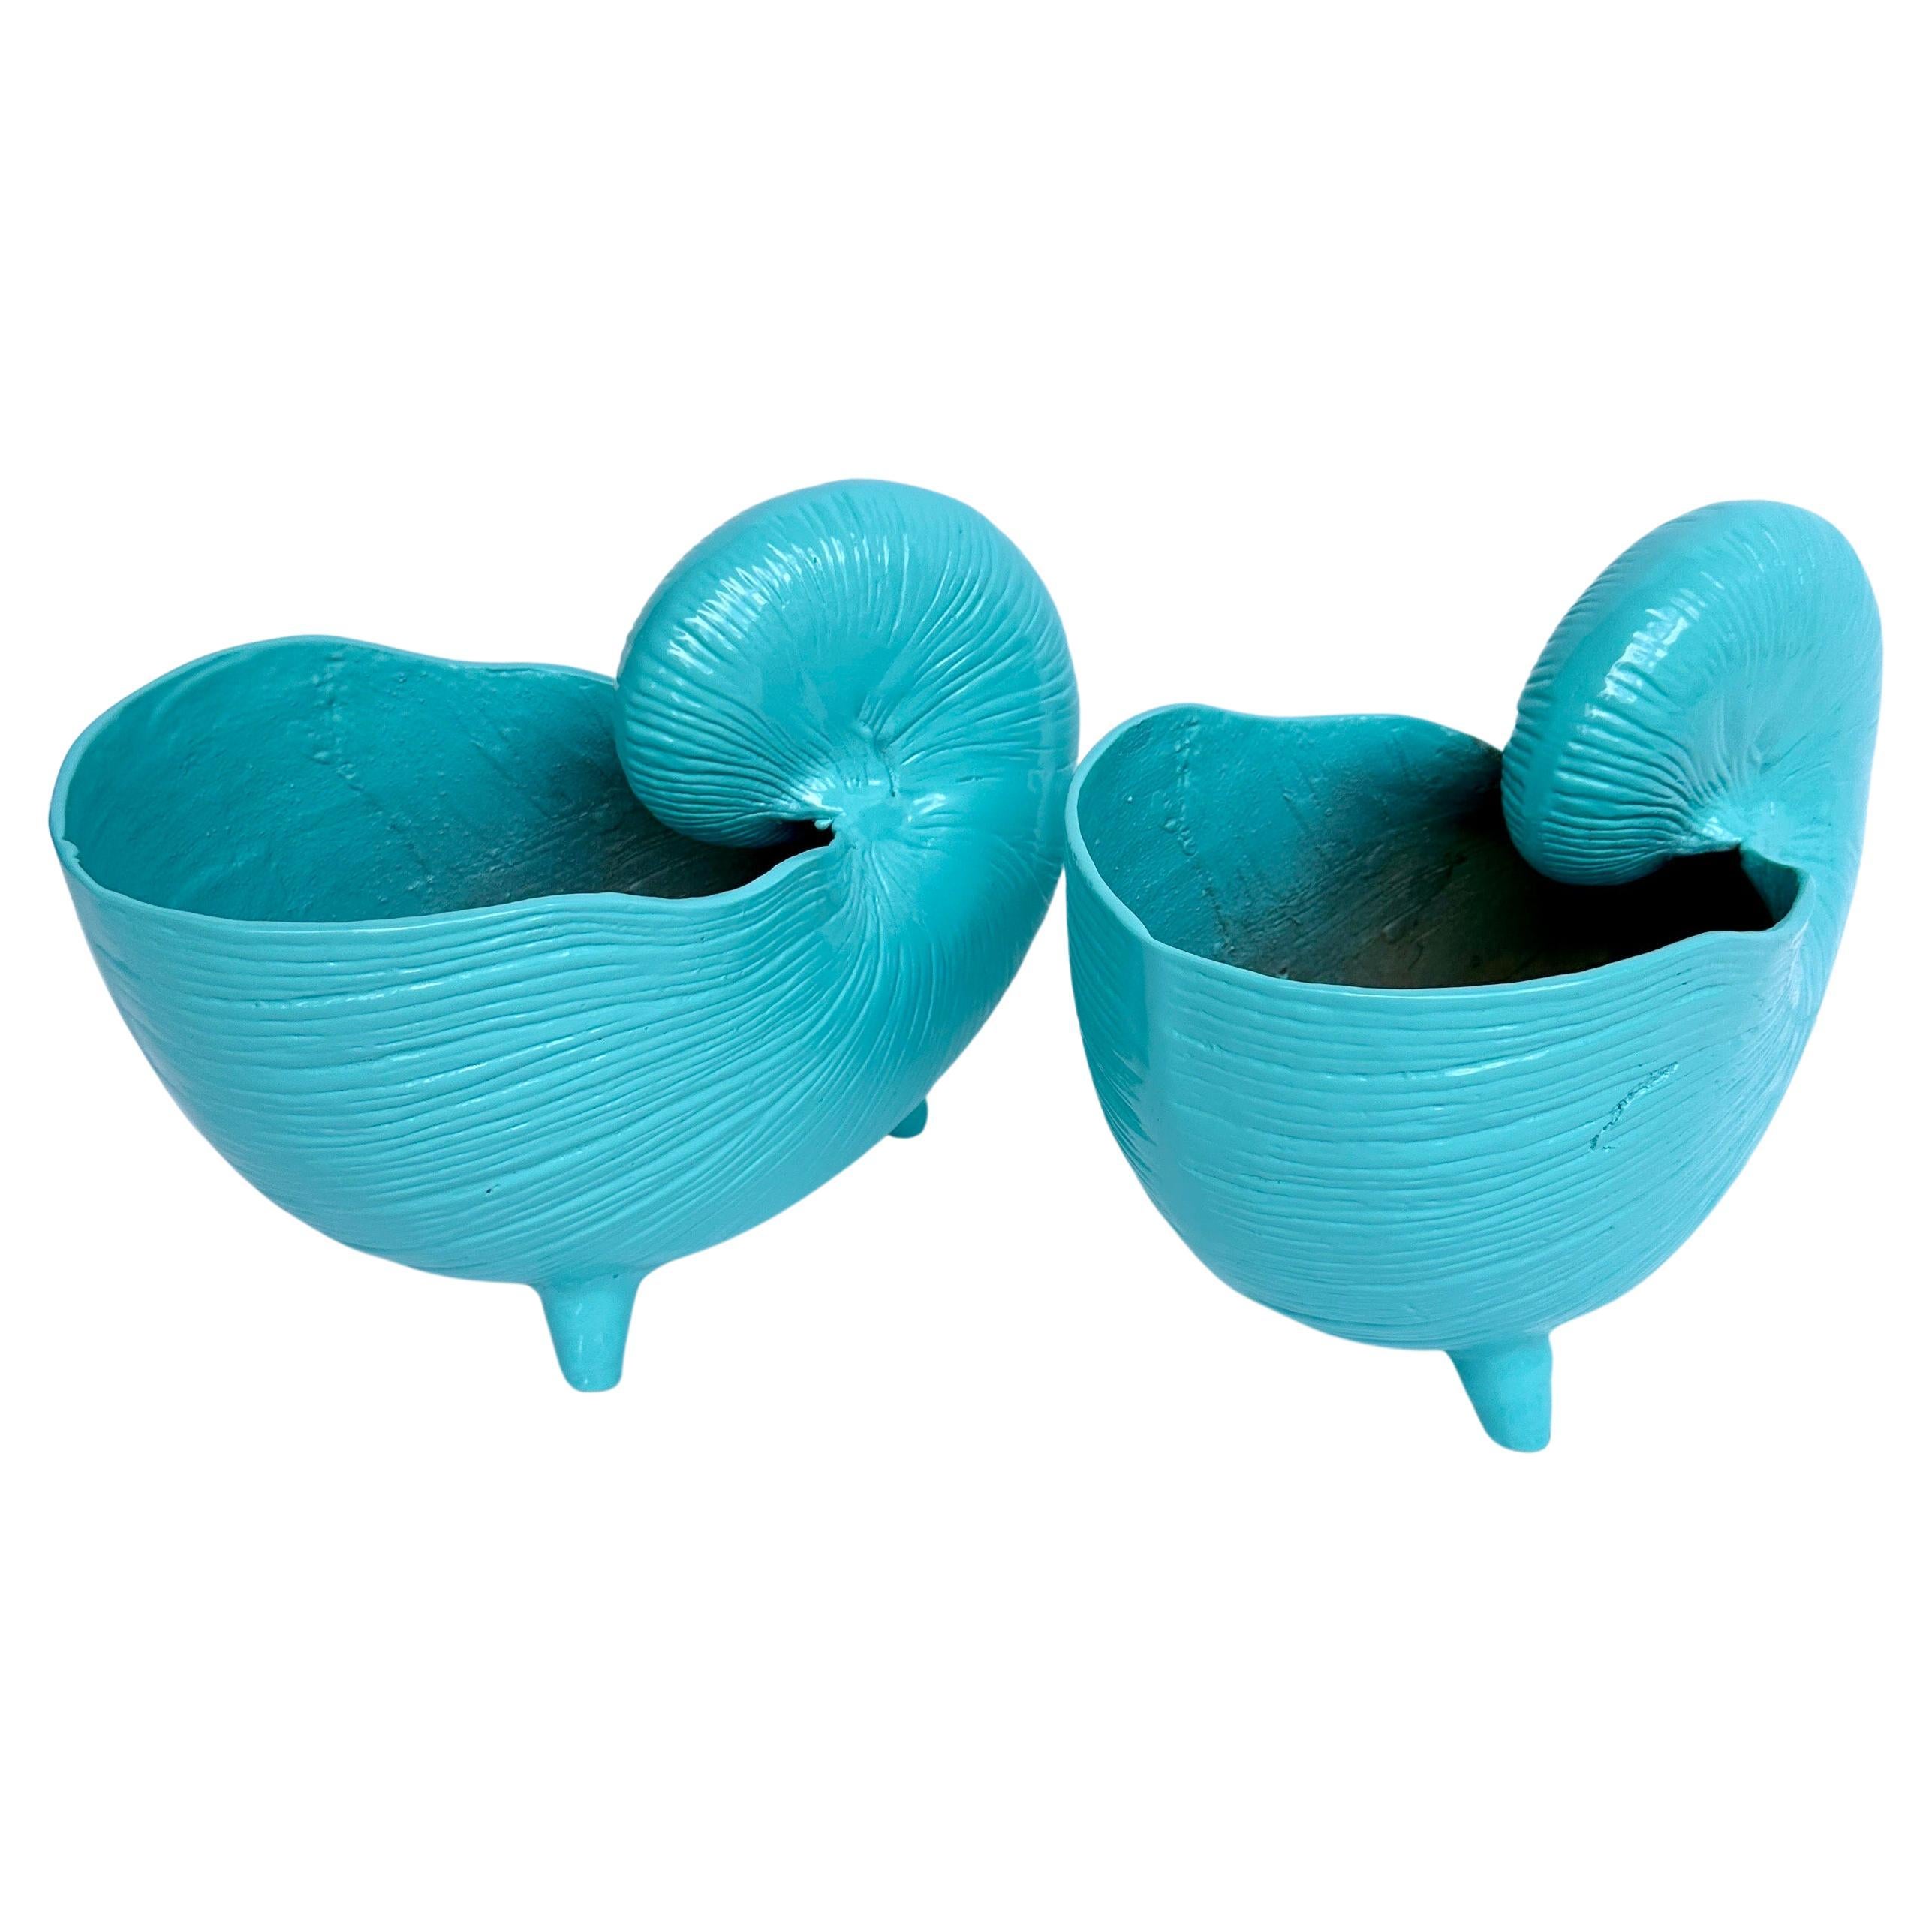 Vintage Pair of Nautilus Planters or Jardinières, Blue Powder-Coated  In Good Condition For Sale In Haddonfield, NJ